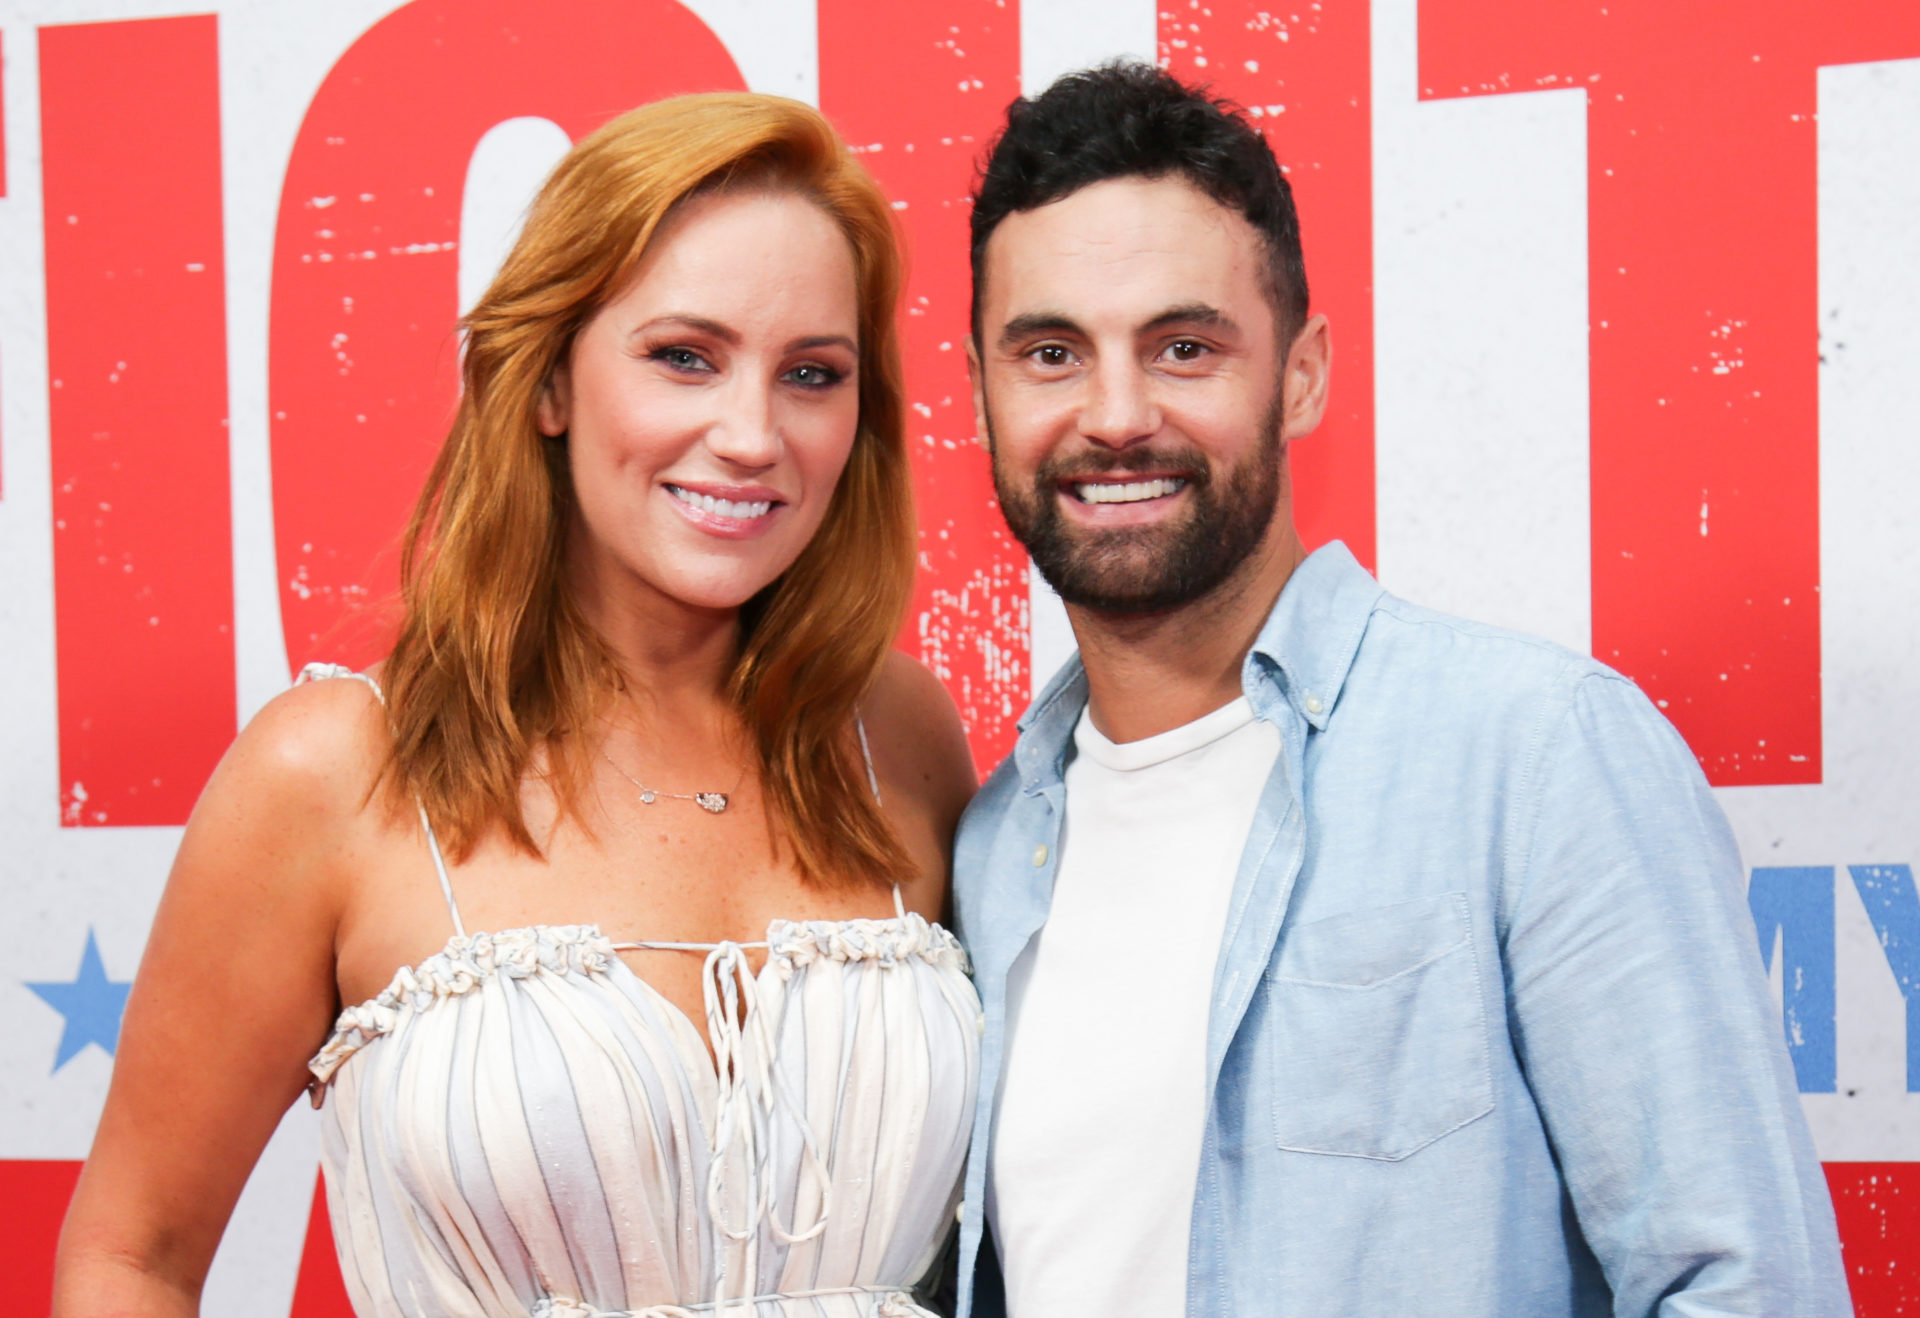 MAFS Australia couples still together and living their happily ever after